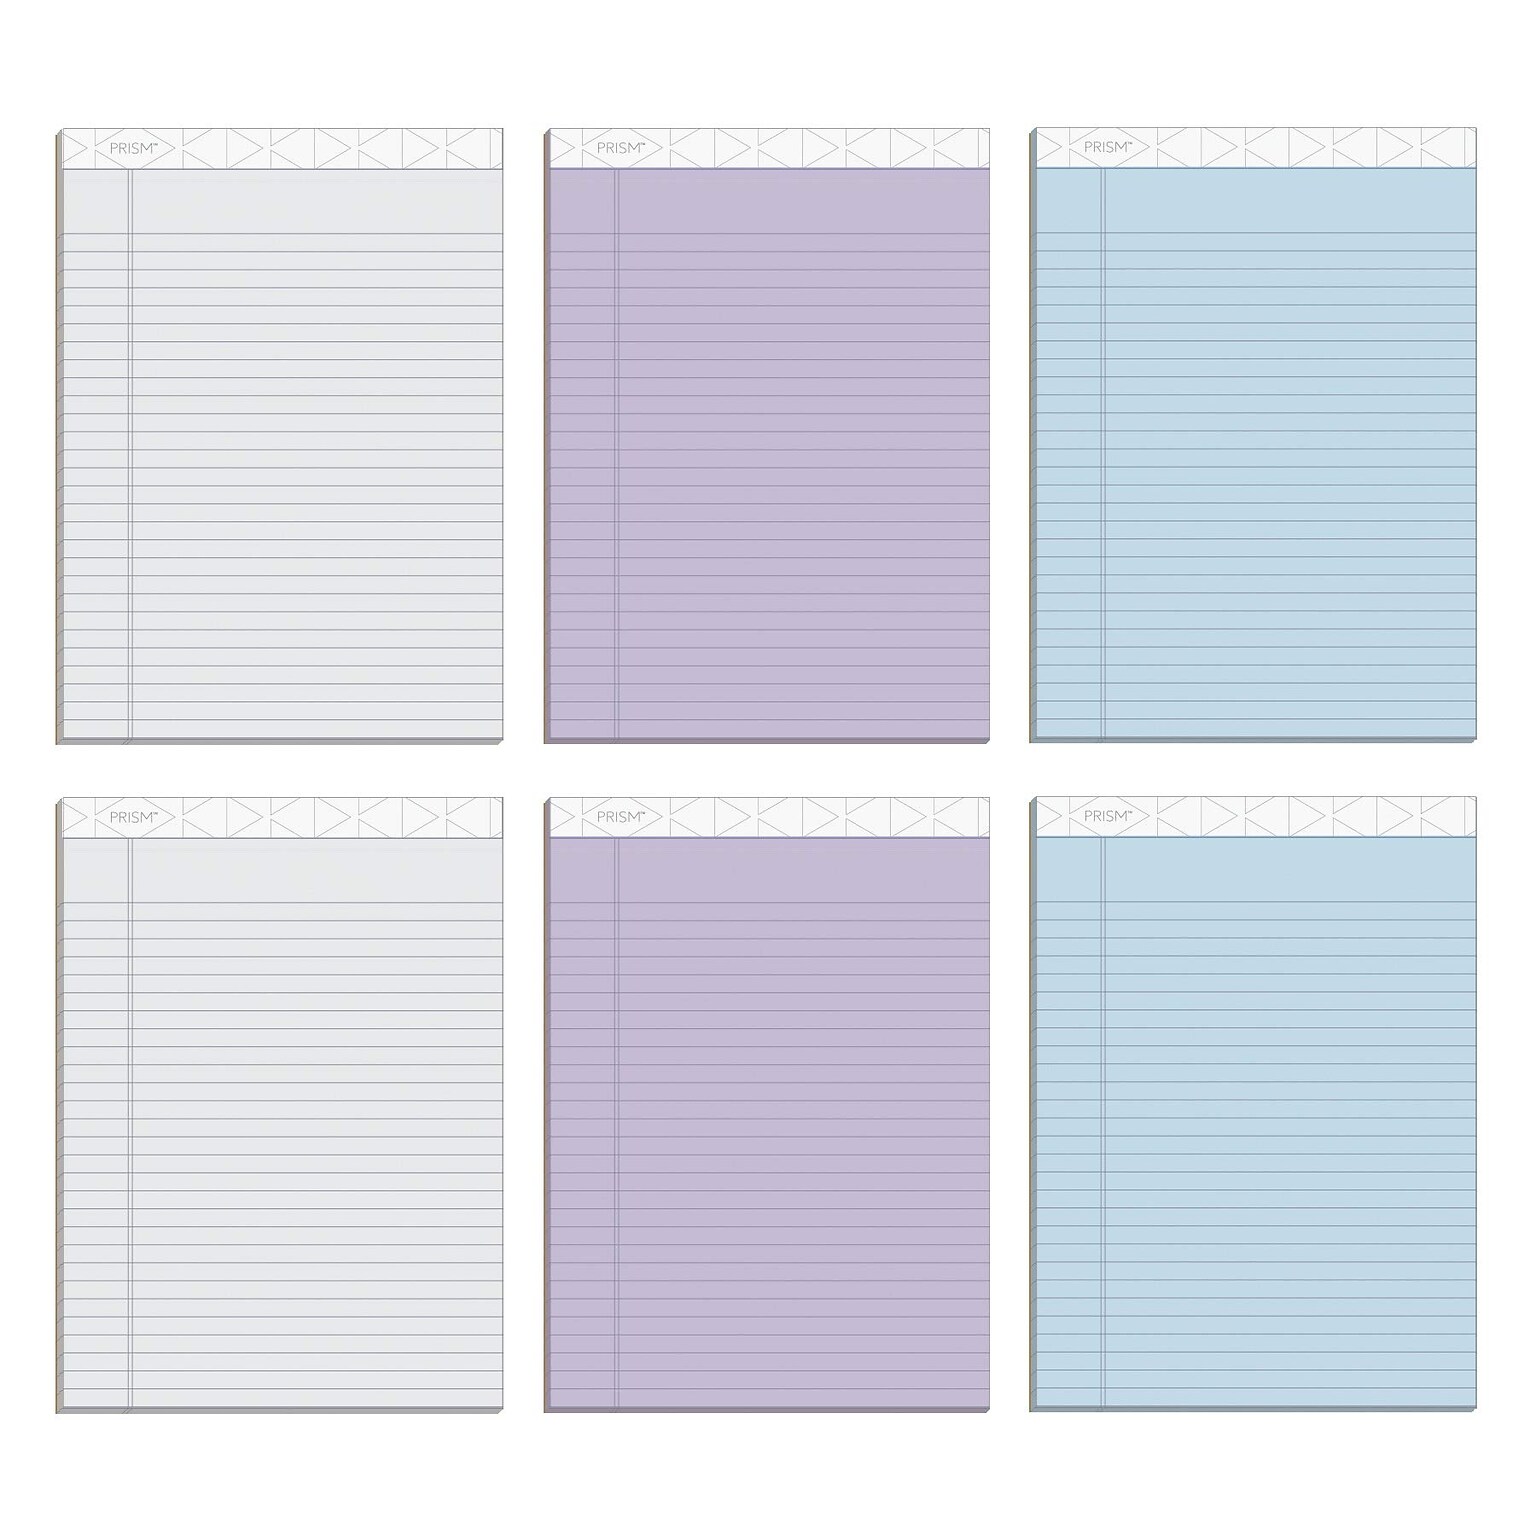 TOPS Prism Notepad, 8.5 x 11.75, Wide Ruled, Assorted, 50 Sheets/Pad, 6 Pads/Pack (TOP63116)